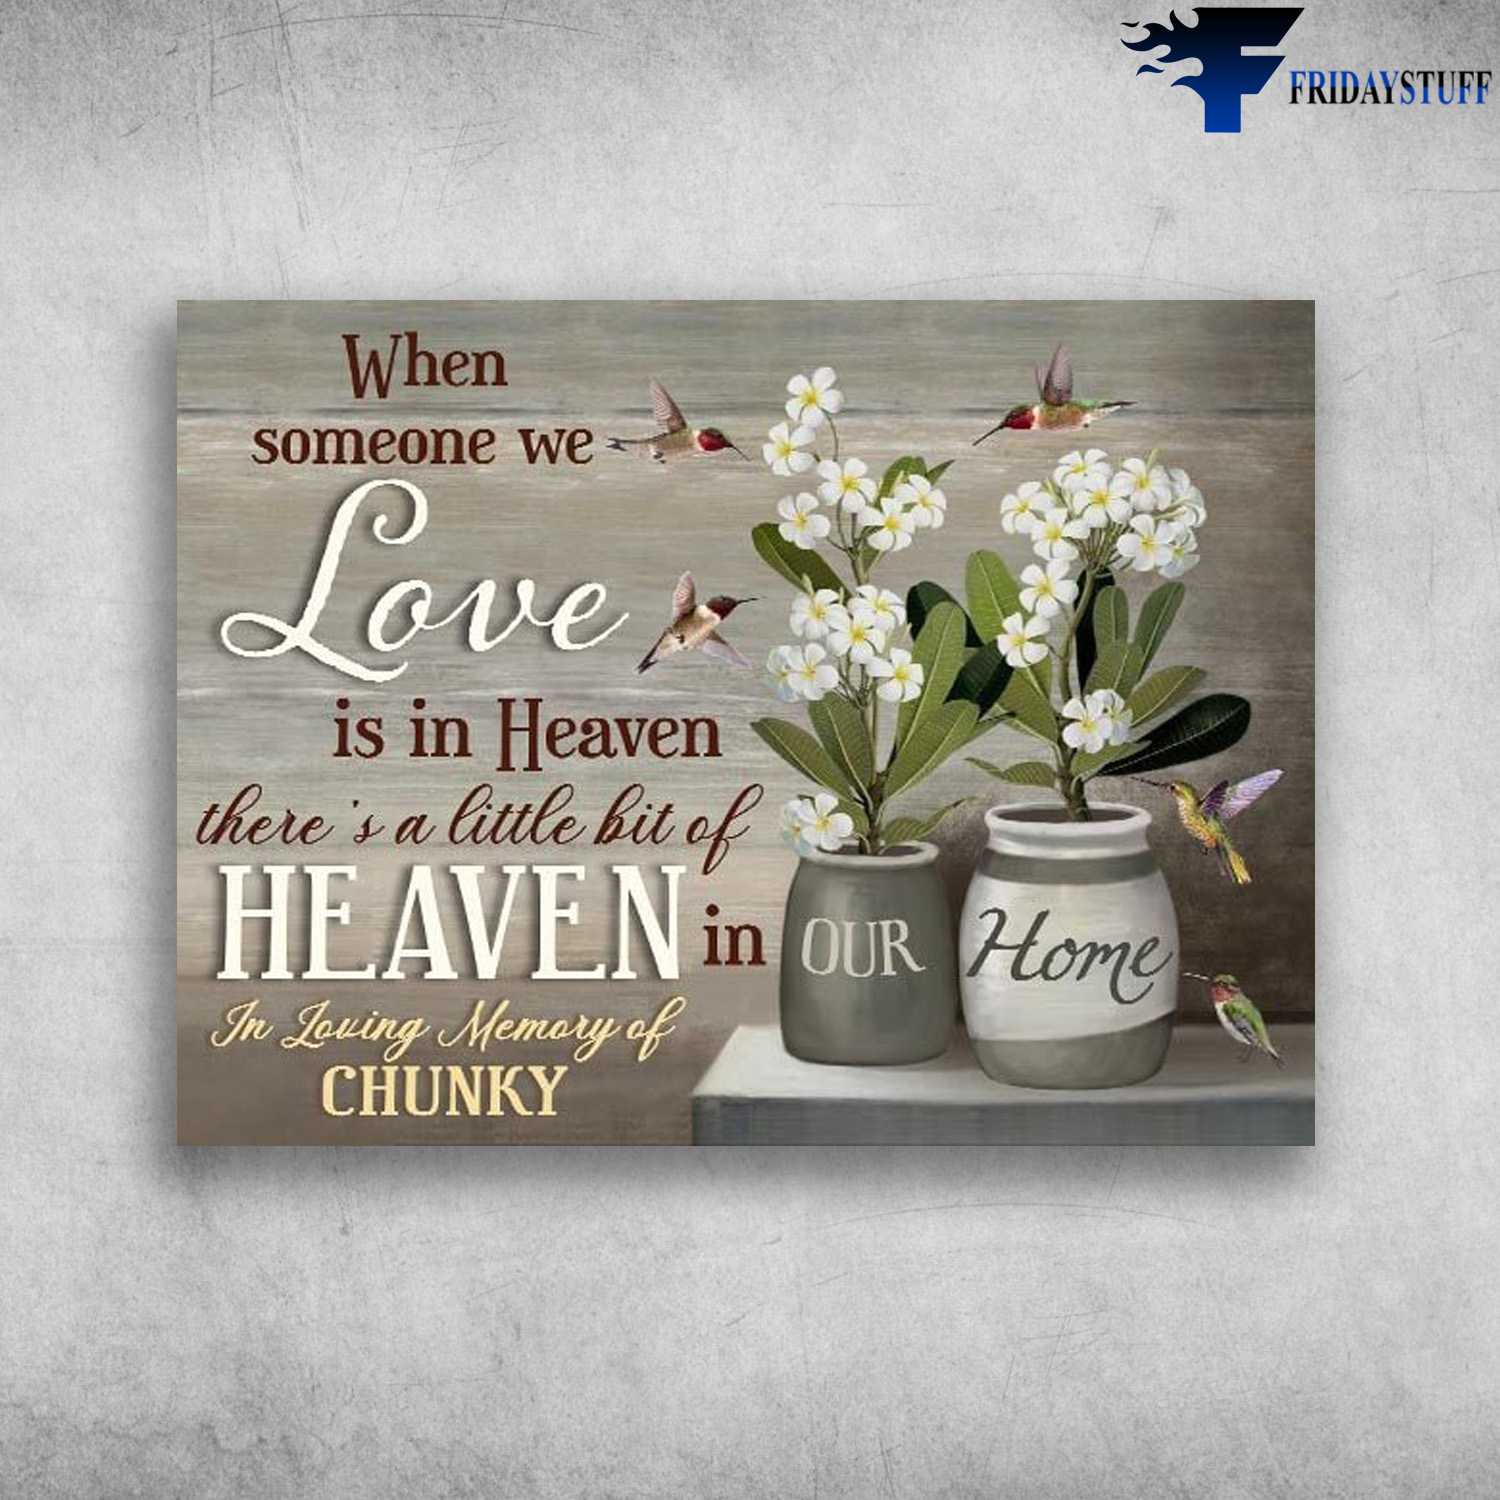 Hummingbird Flower - When Someone We Love, Is In Heaven, There's A Little Bit Of Heaven In Our Home, In Loving Memory Of Chunky